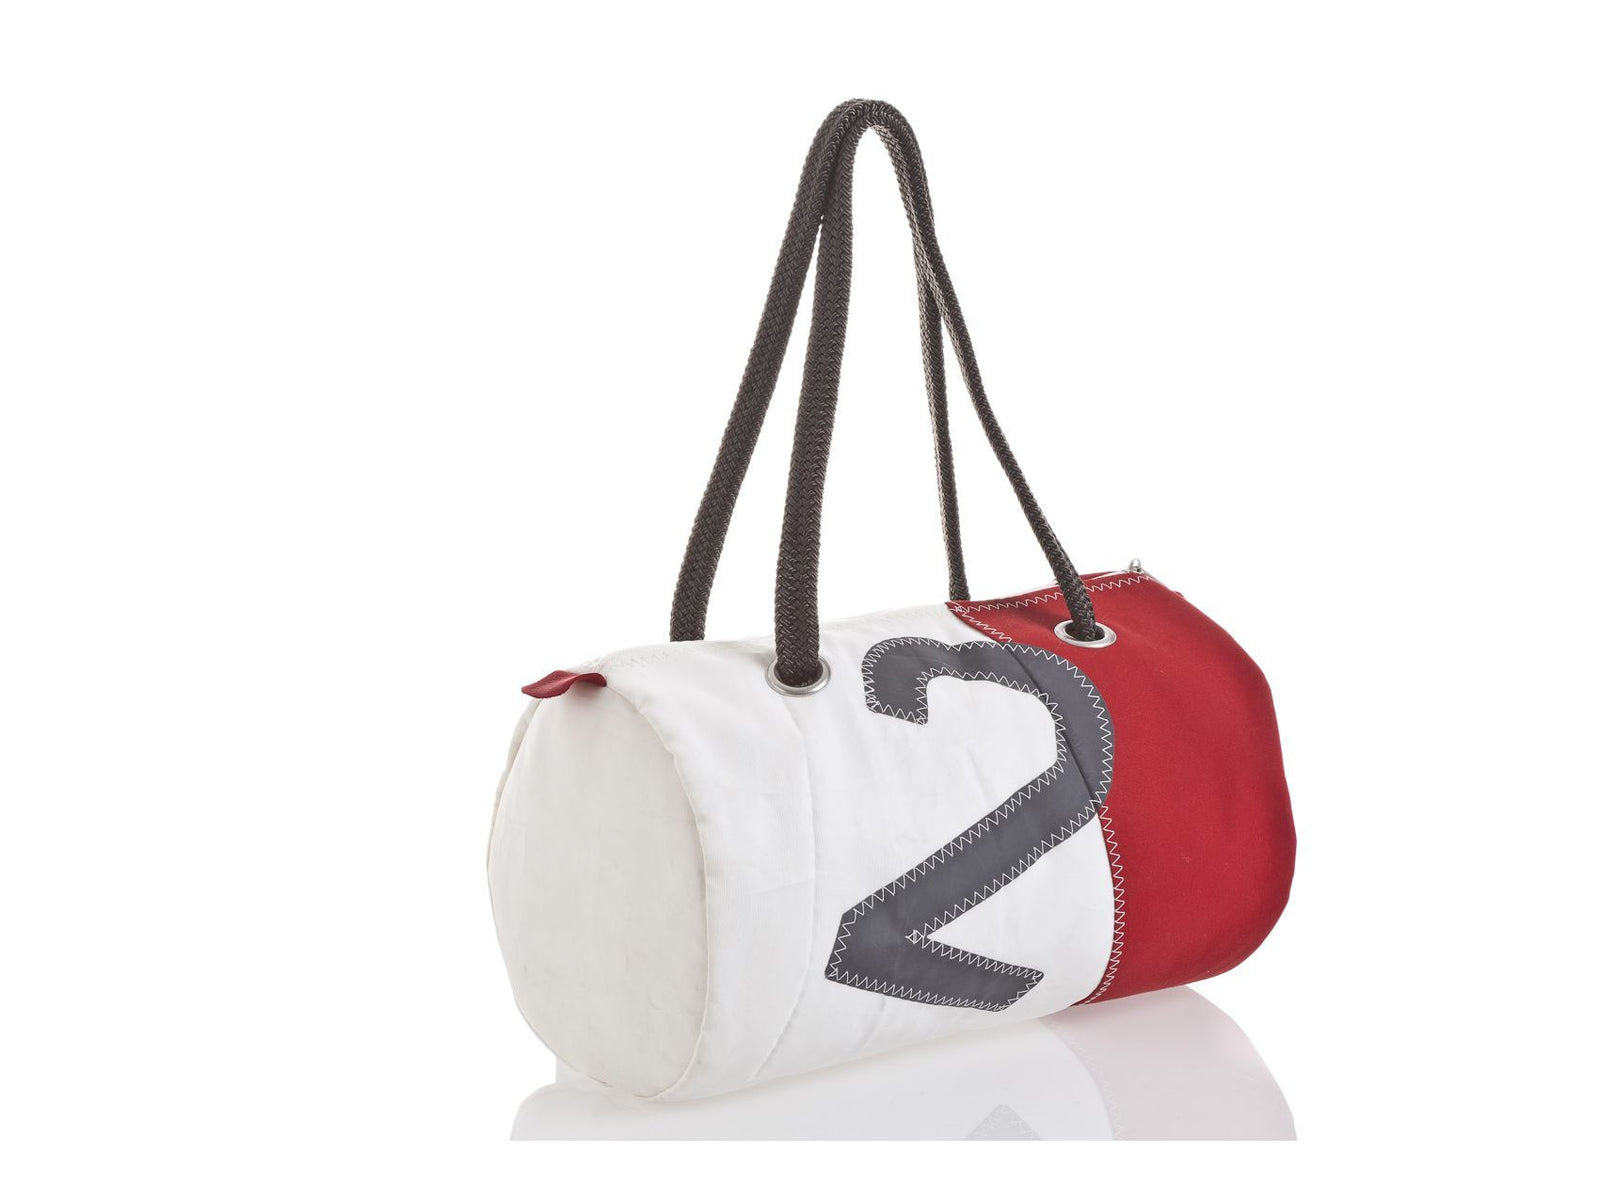 RECYCLED SAILS BAGS - OMNIYACHT